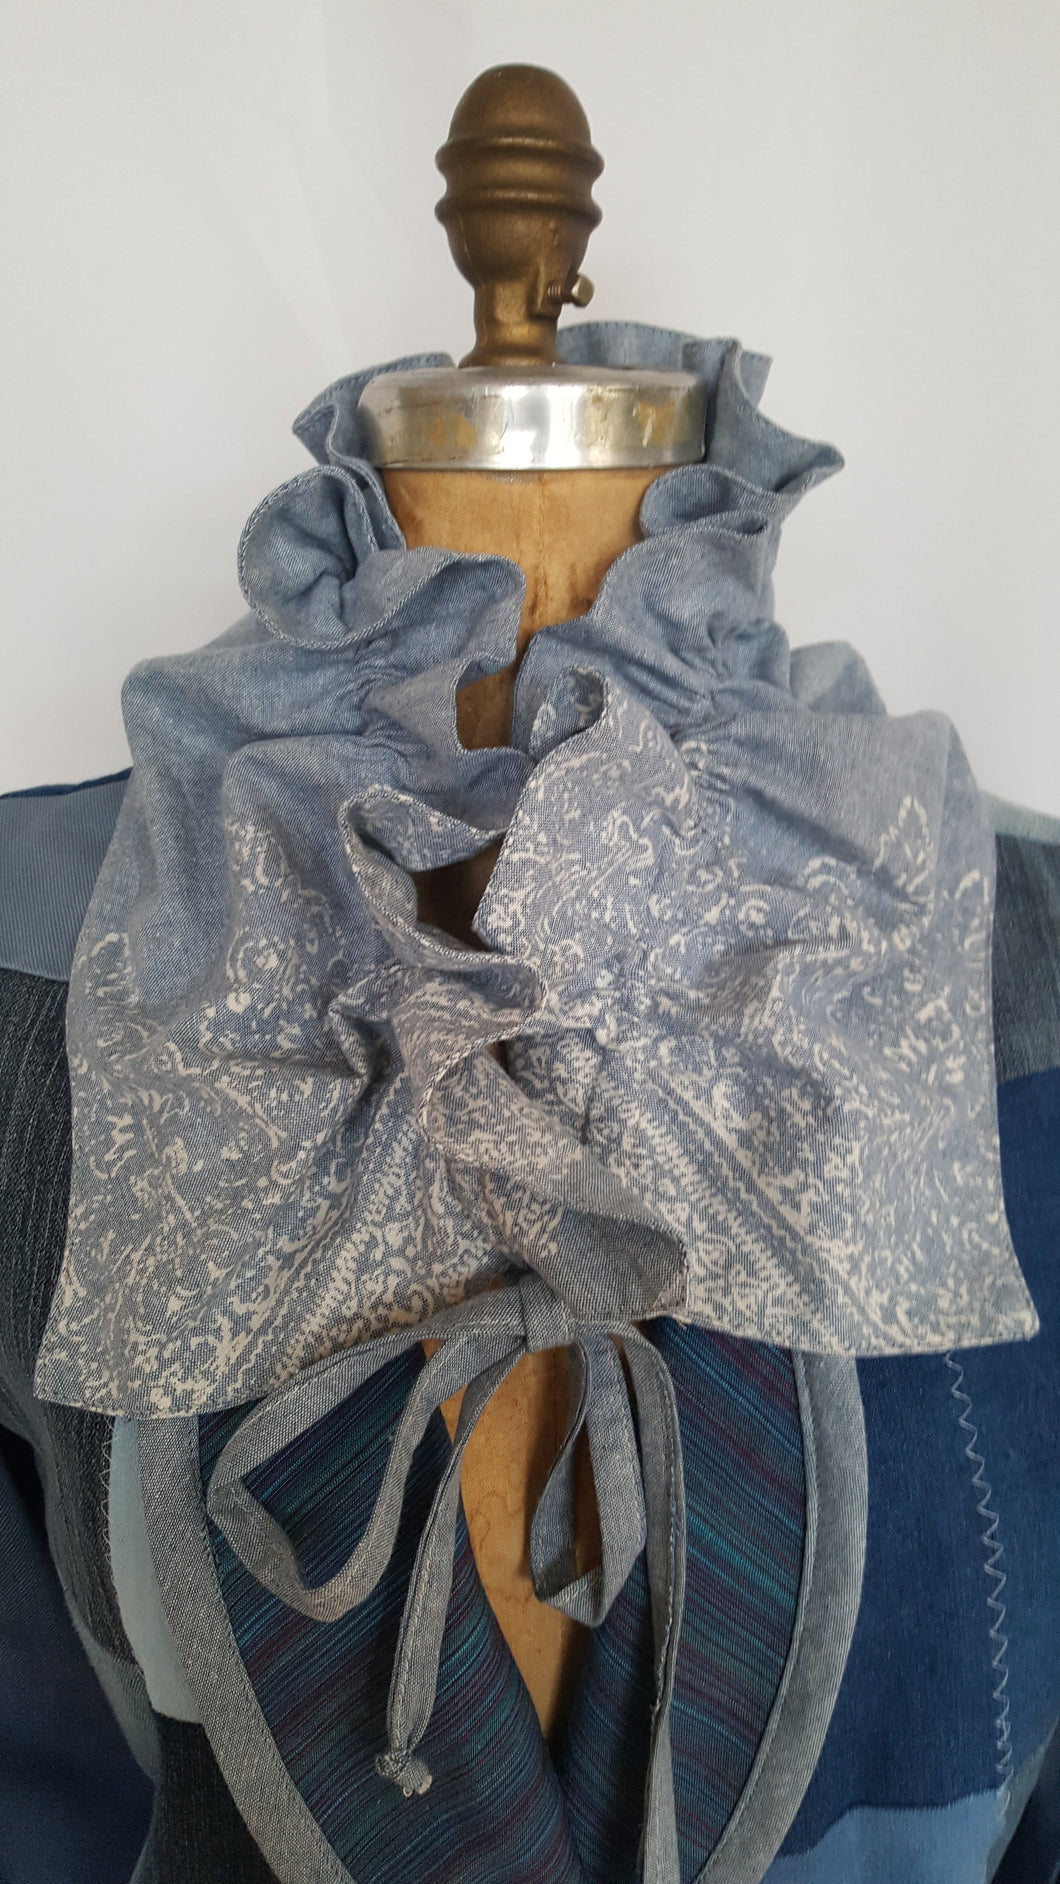 Cotton fabric collar as accessory in blue